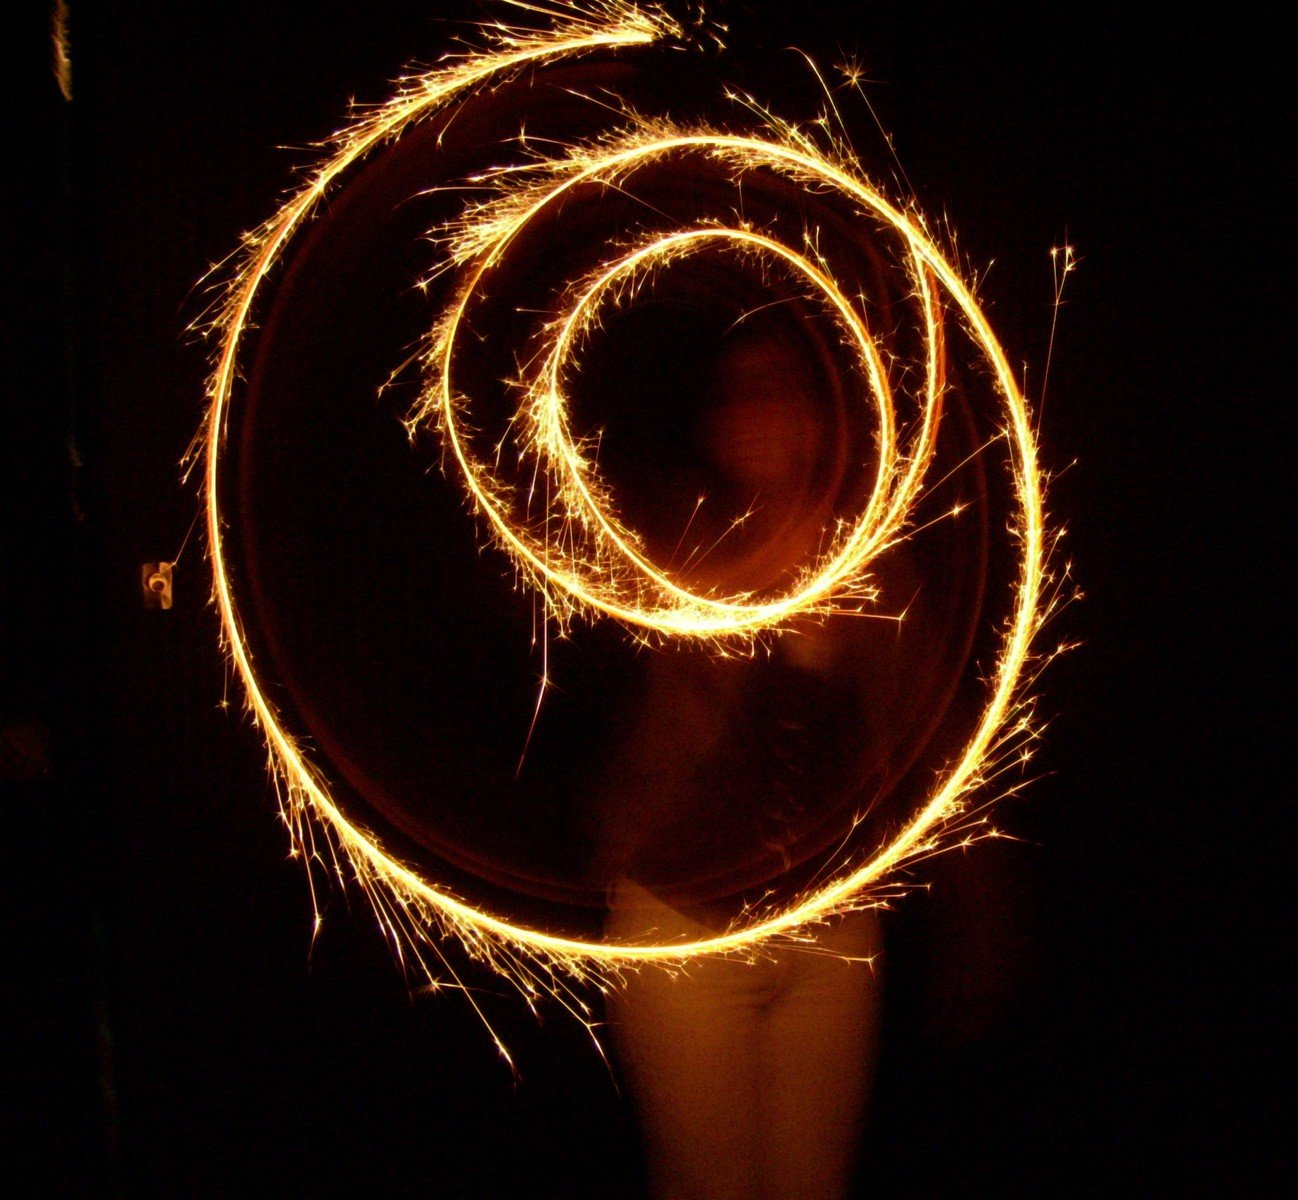 this is a firework with circles going across